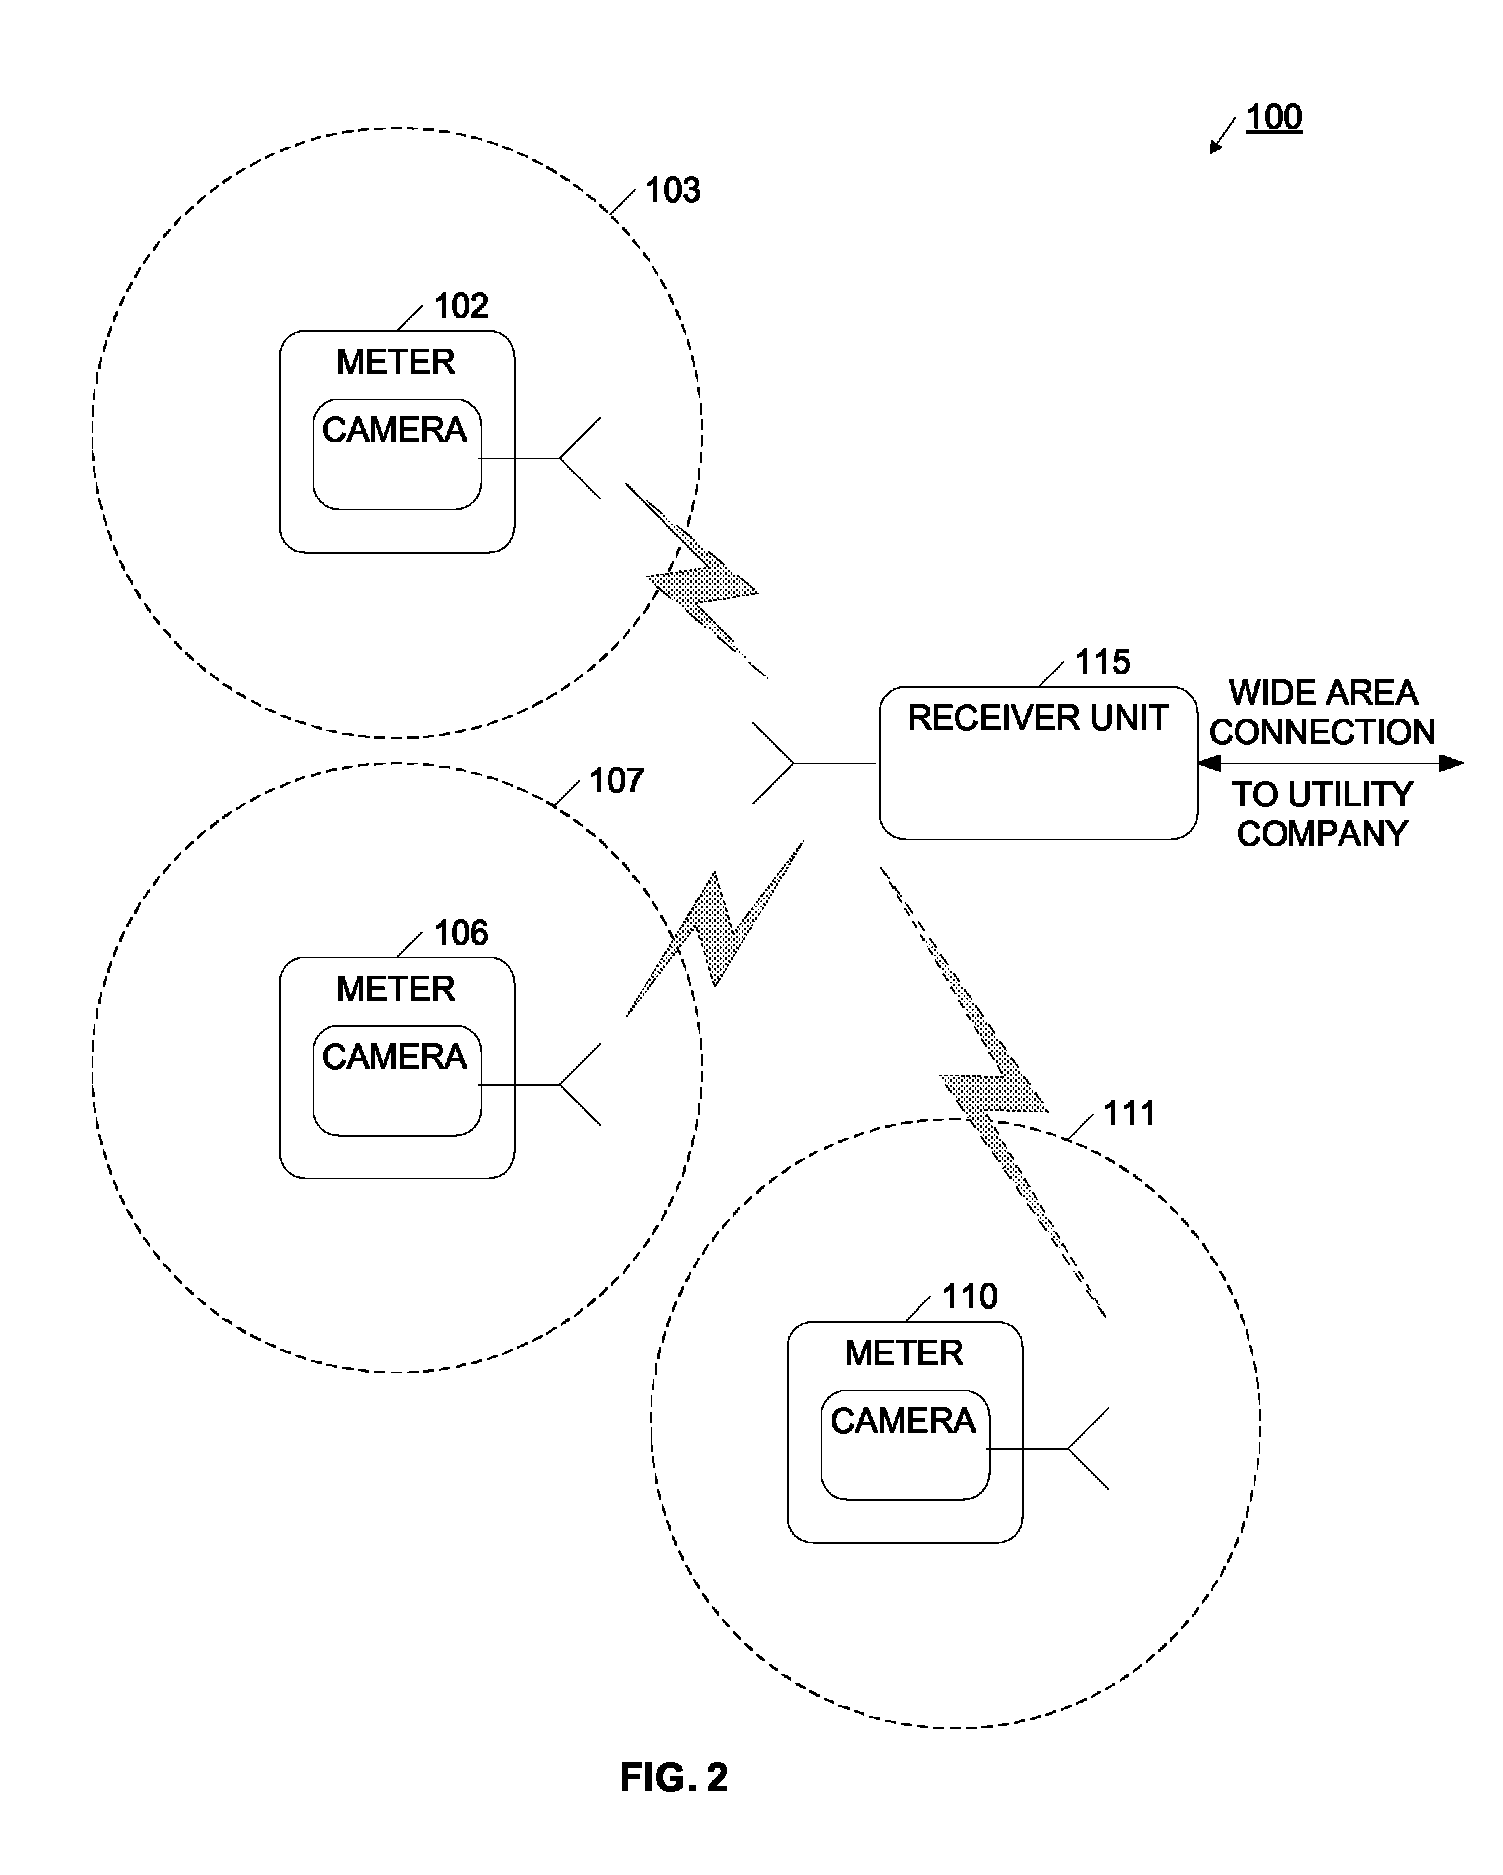 Remote meter reader using a network sensor system and protocol